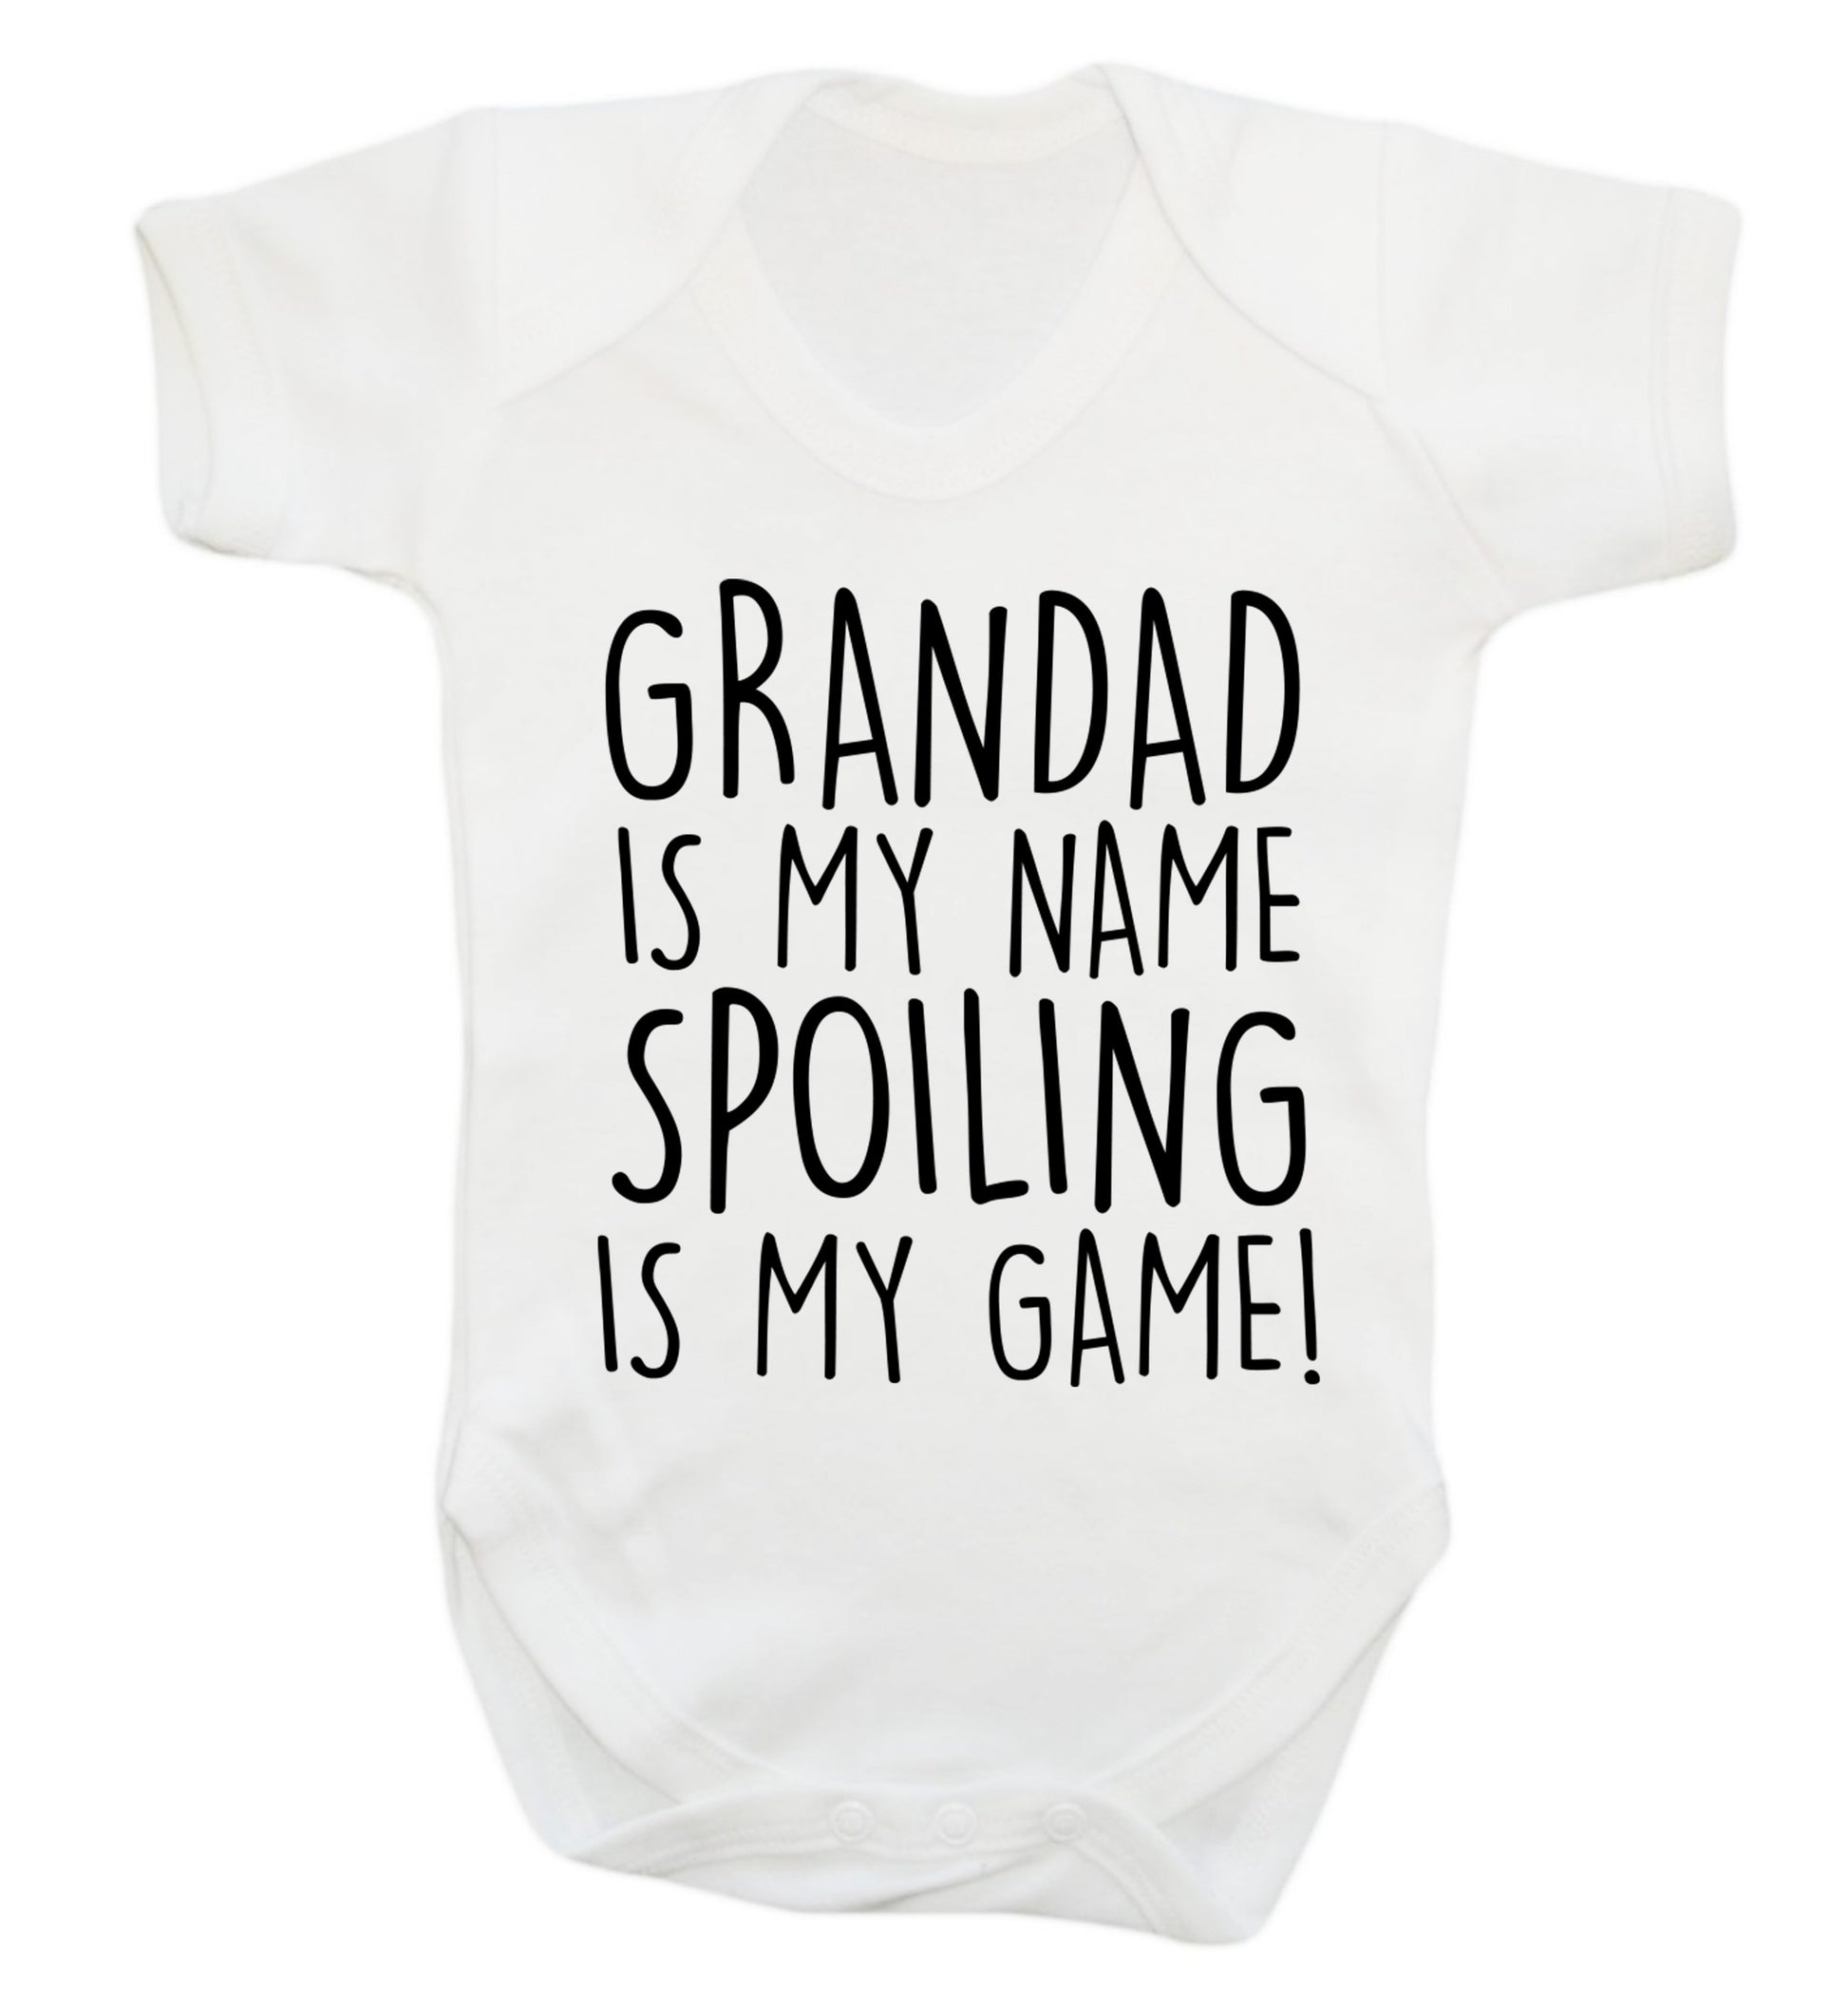 Grandad is my name, spoiling is my game Baby Vest white 18-24 months